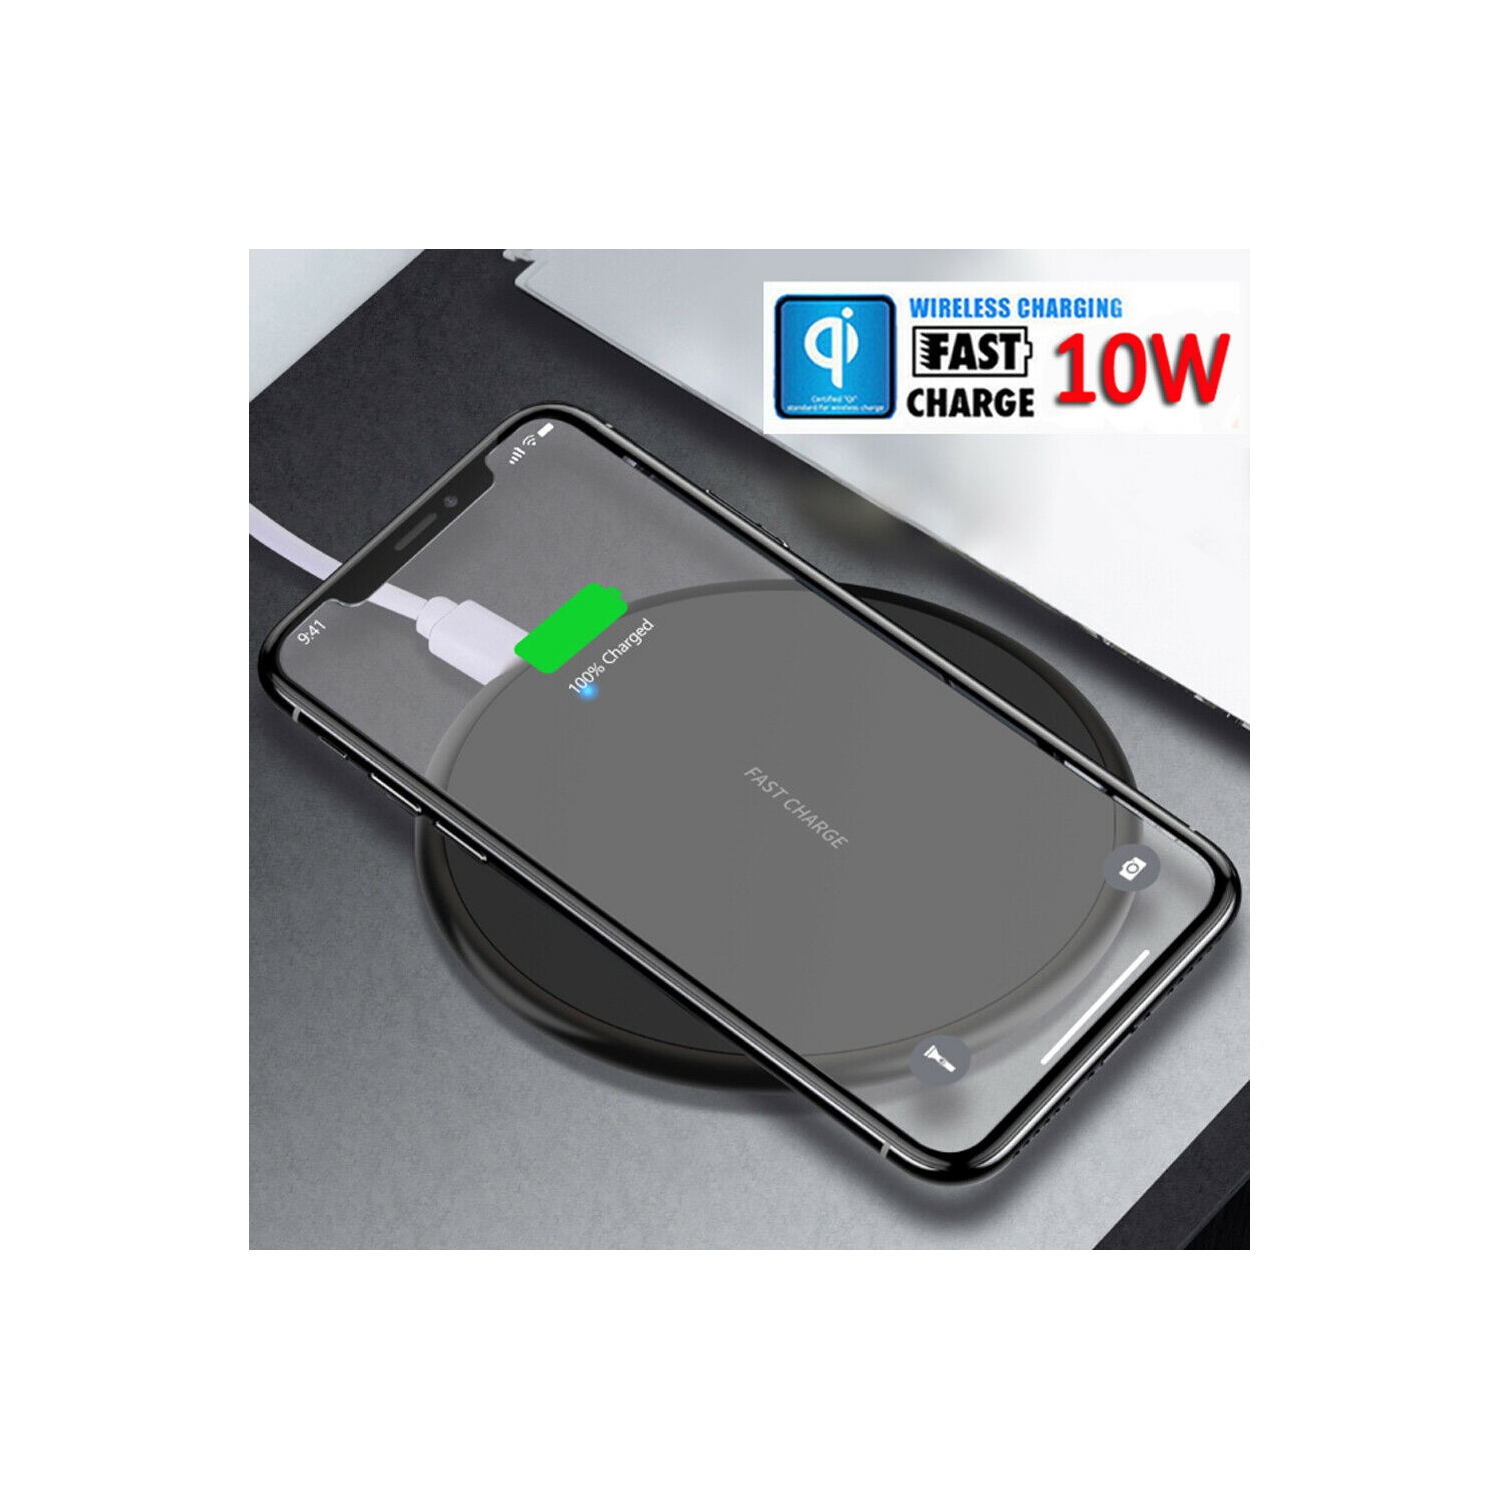 10W Qi Wireless Fast Charger Charging Pad For Samsung iPhone, Android and IOS Phones (Black)